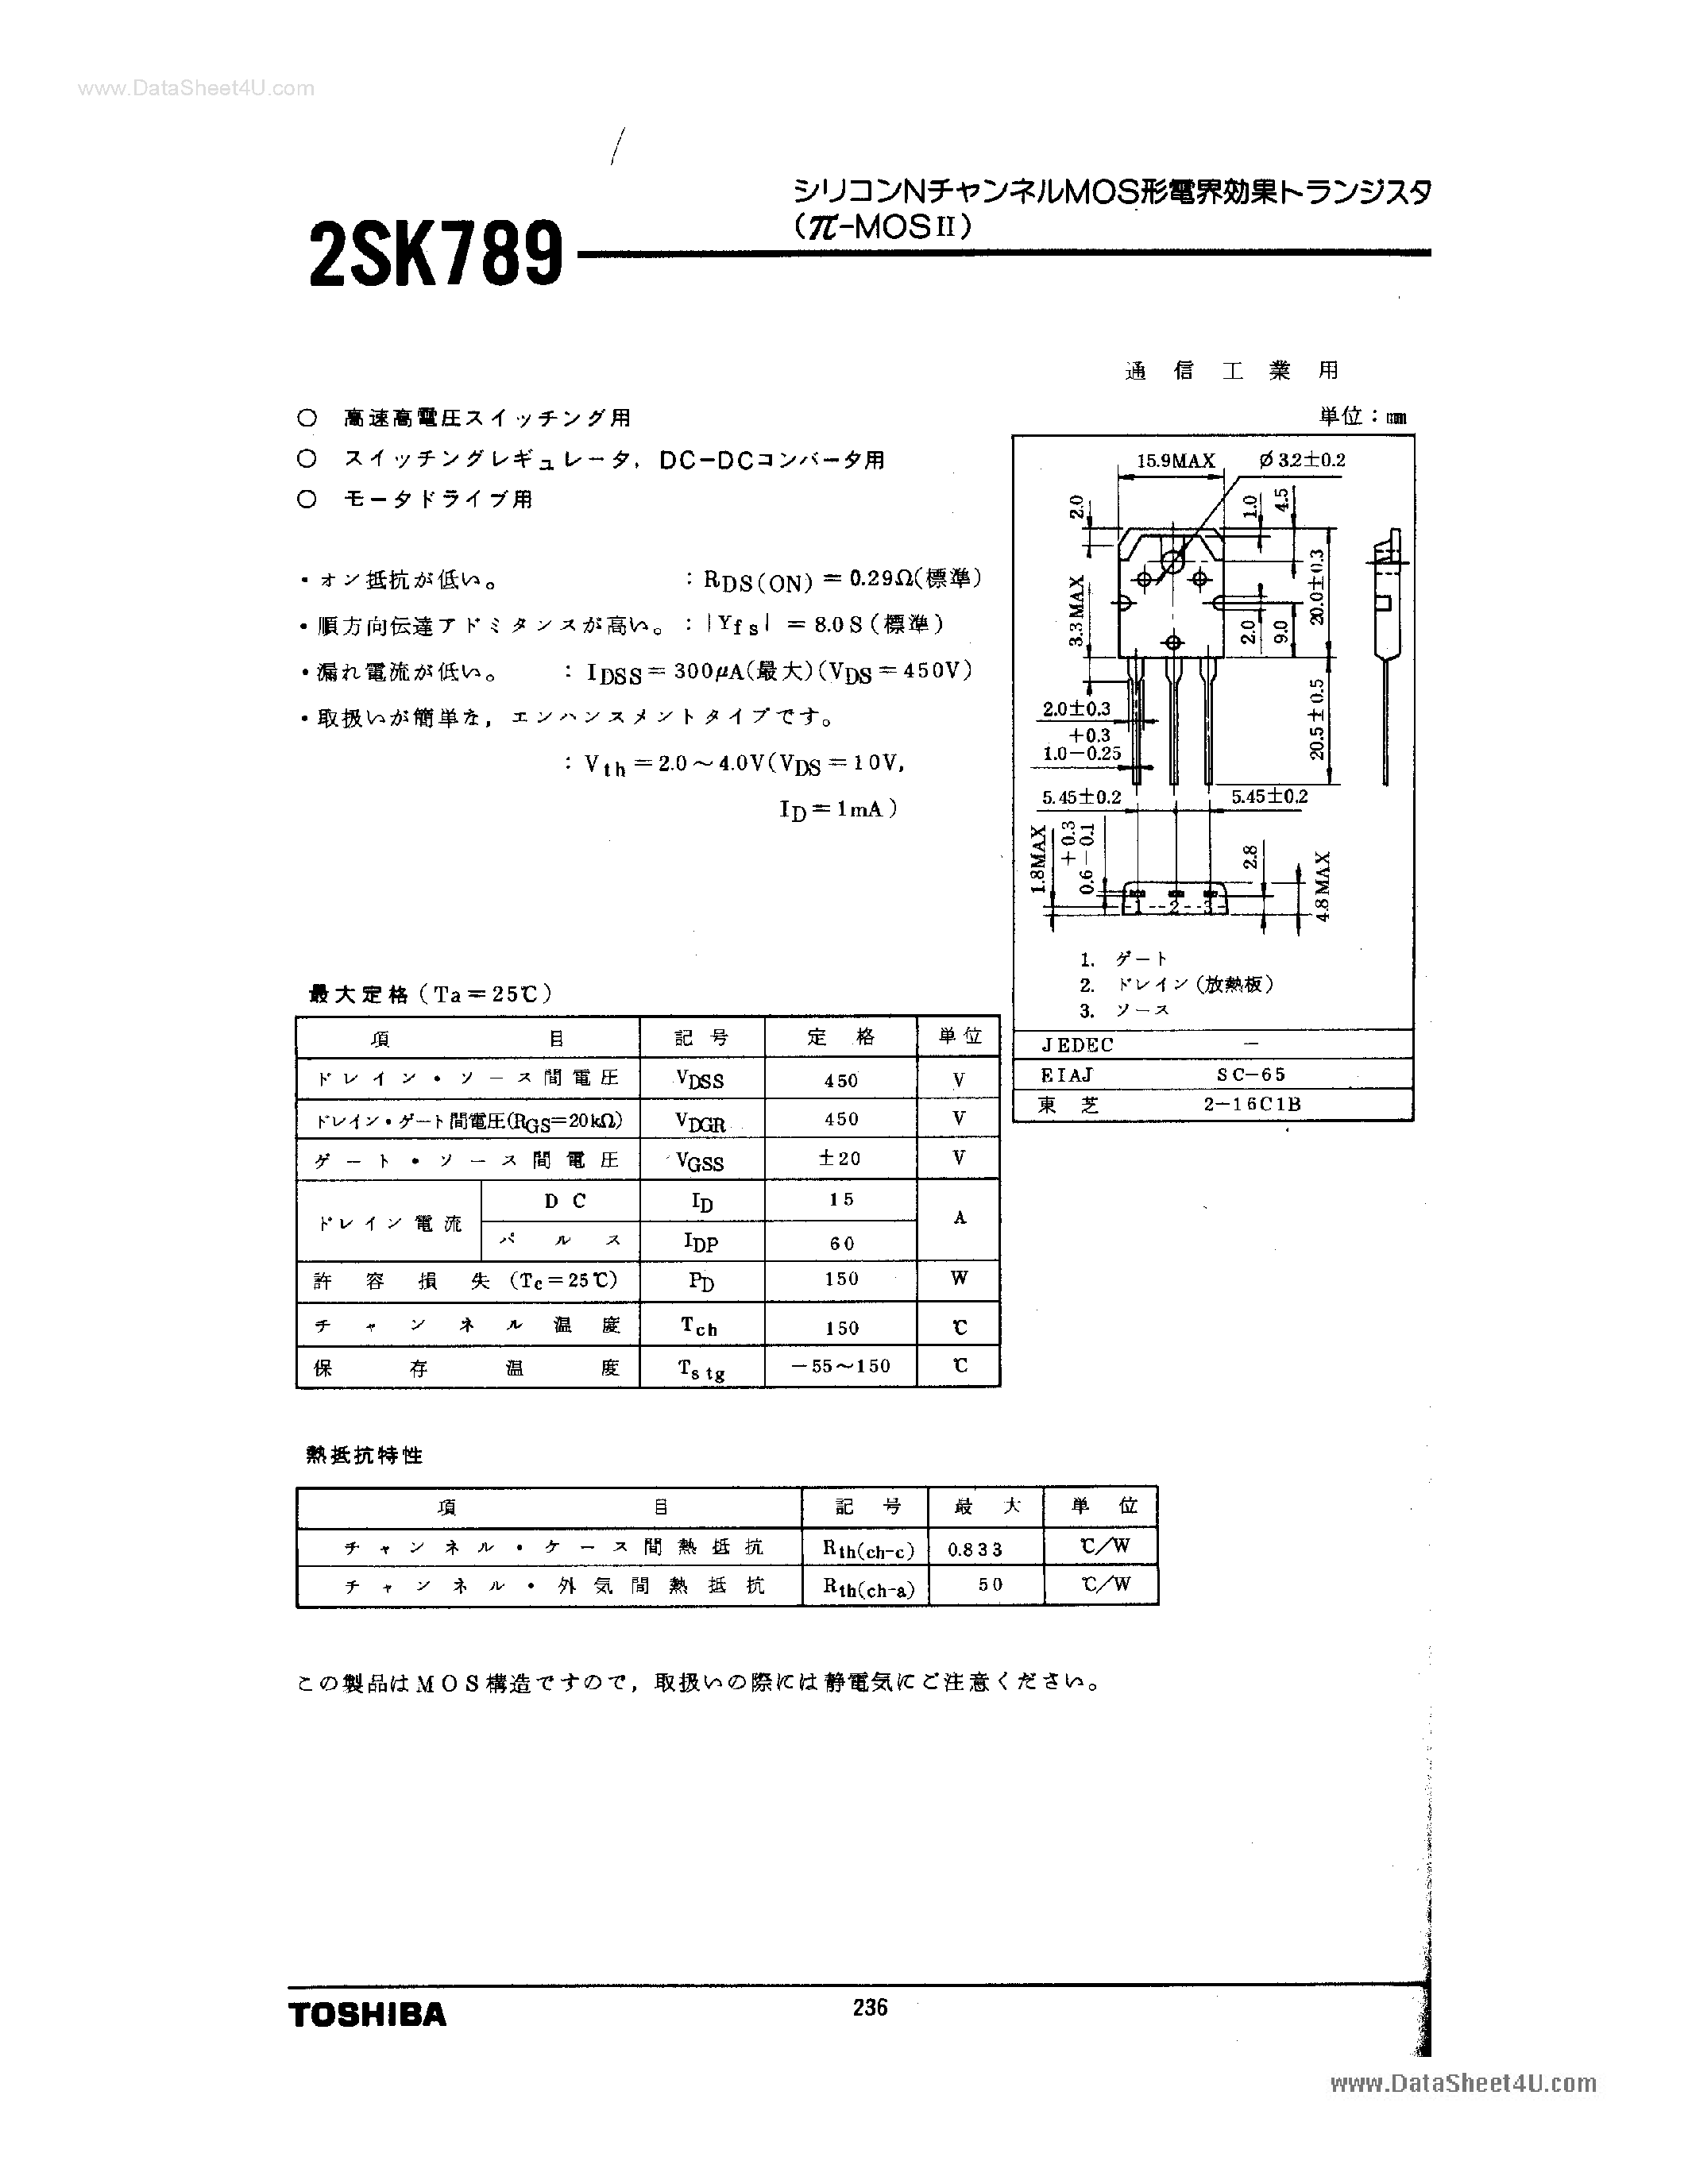 Datasheet K789 - Search -----> 2SK789 page 1